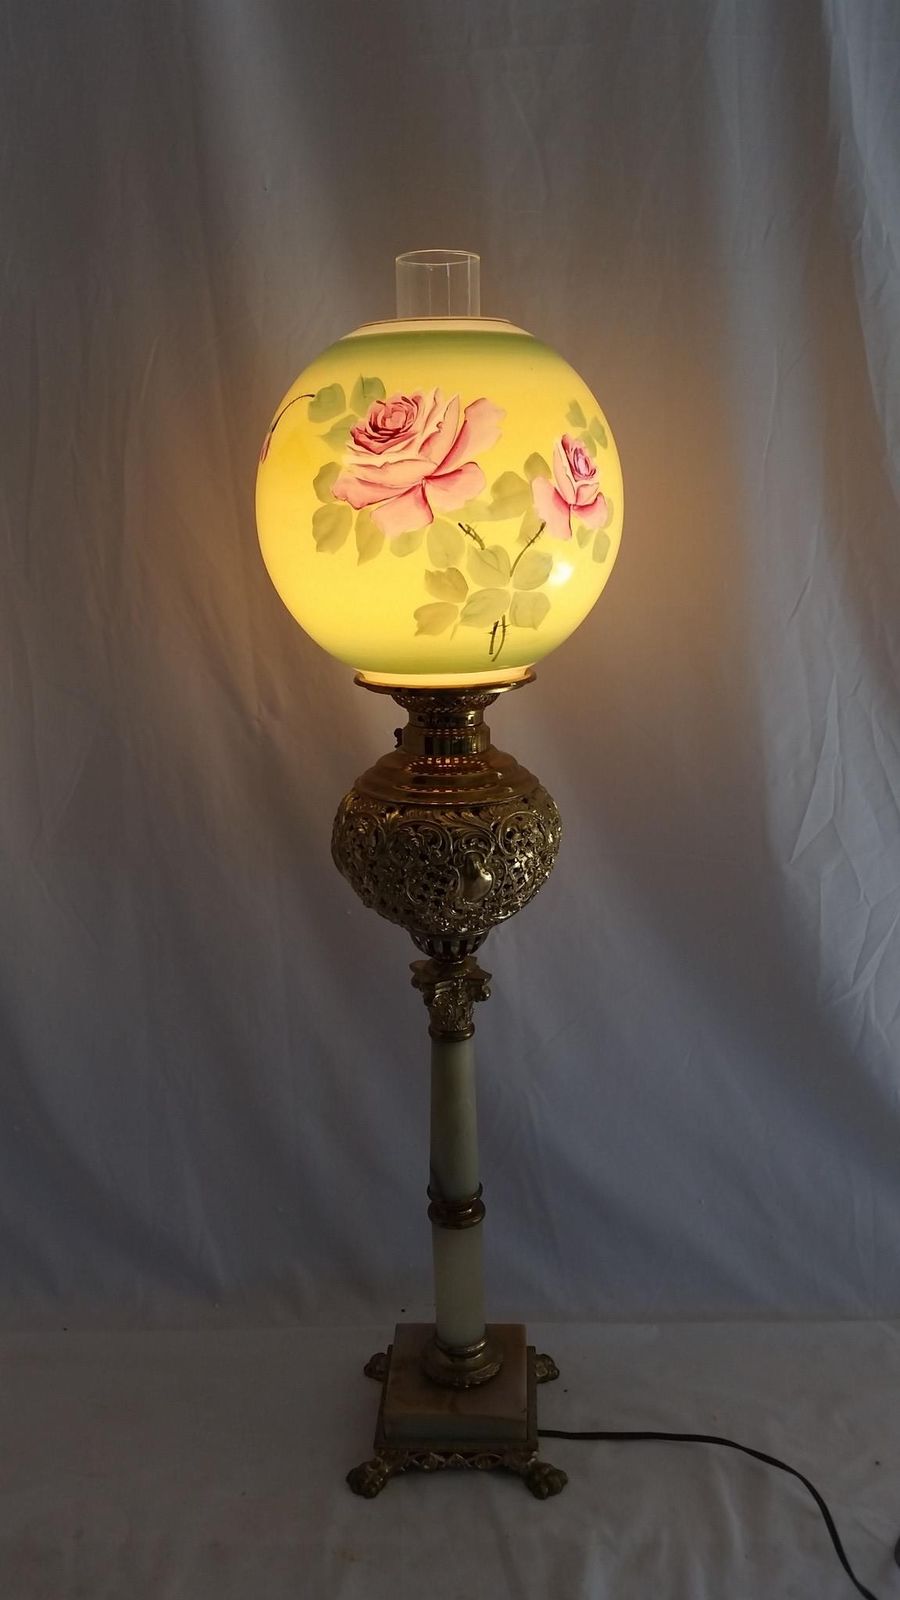 Antique Parlor,Banquet,GWTW Gilt Oil Lamp,Painted Roses Shade,Marble,Electrified